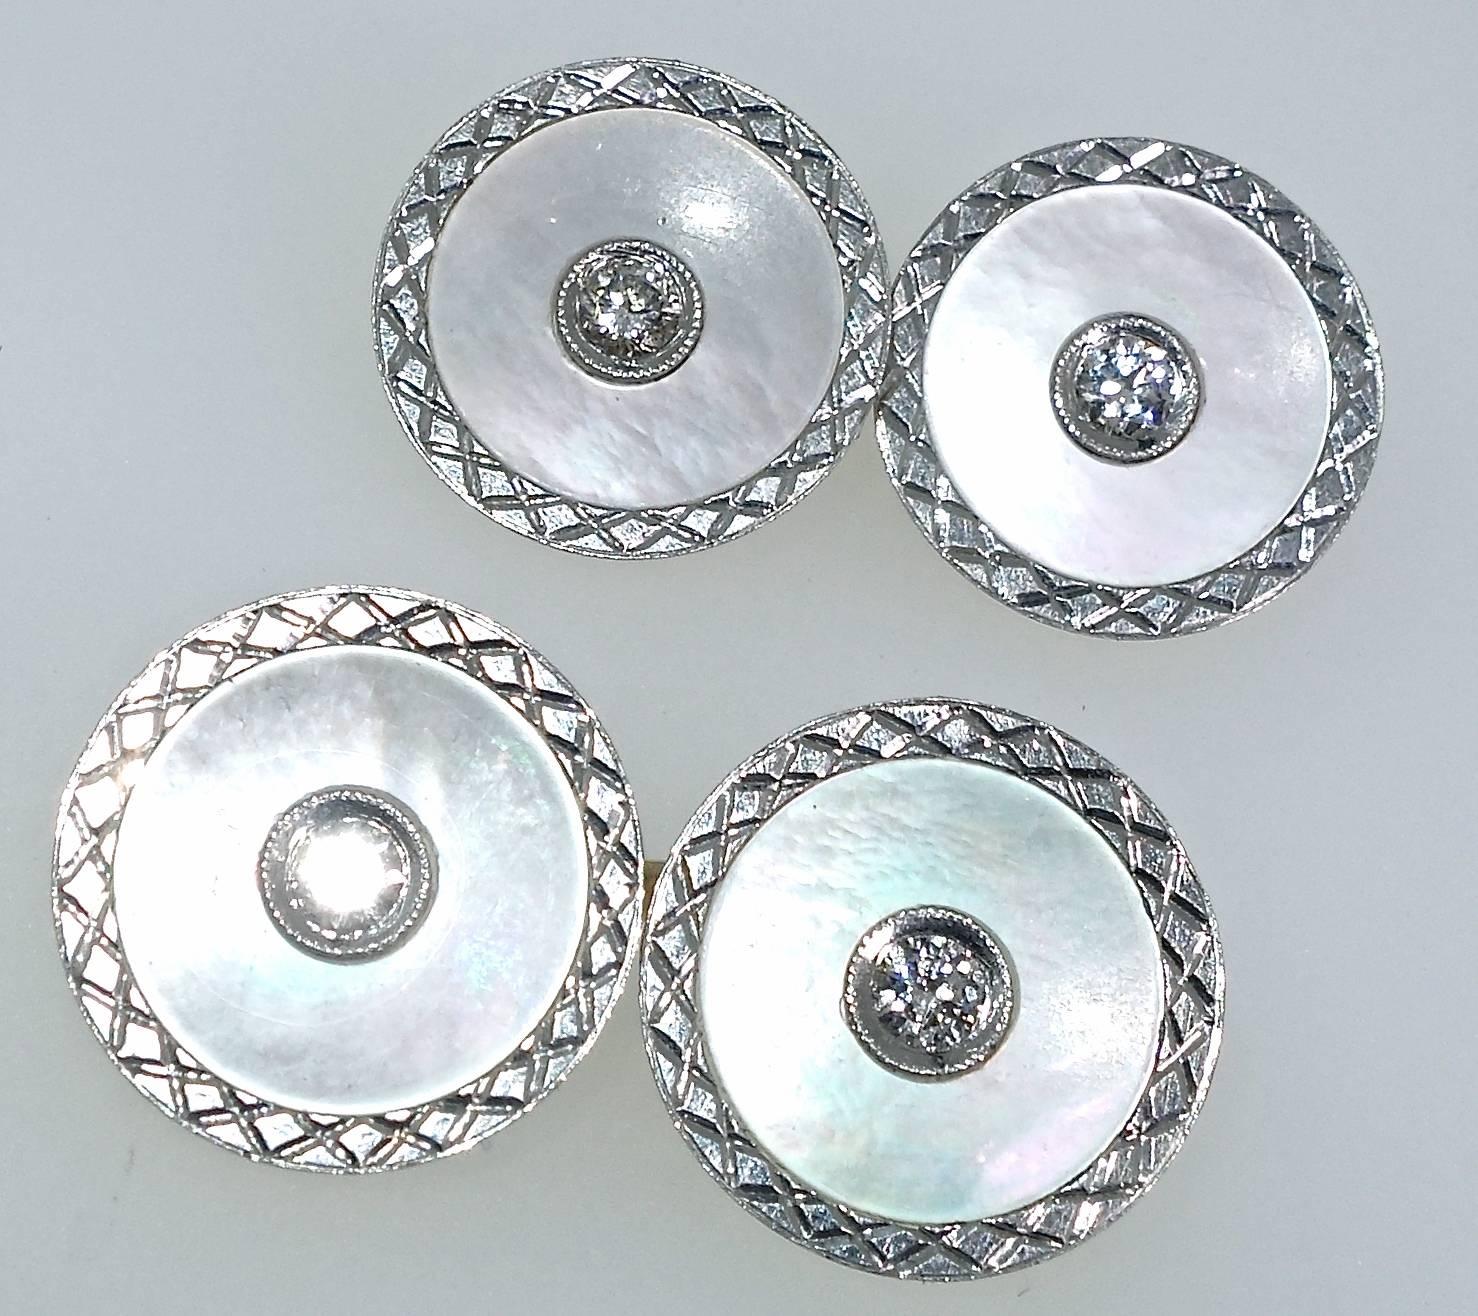 Platinum cufflinks with fine deeply engraved edges surrounding white mother of pearl  and a bead set diamond in the center and backed with gold.  There are .33 cts. total weight of the white European cut diamonds.  Early Art Deco.